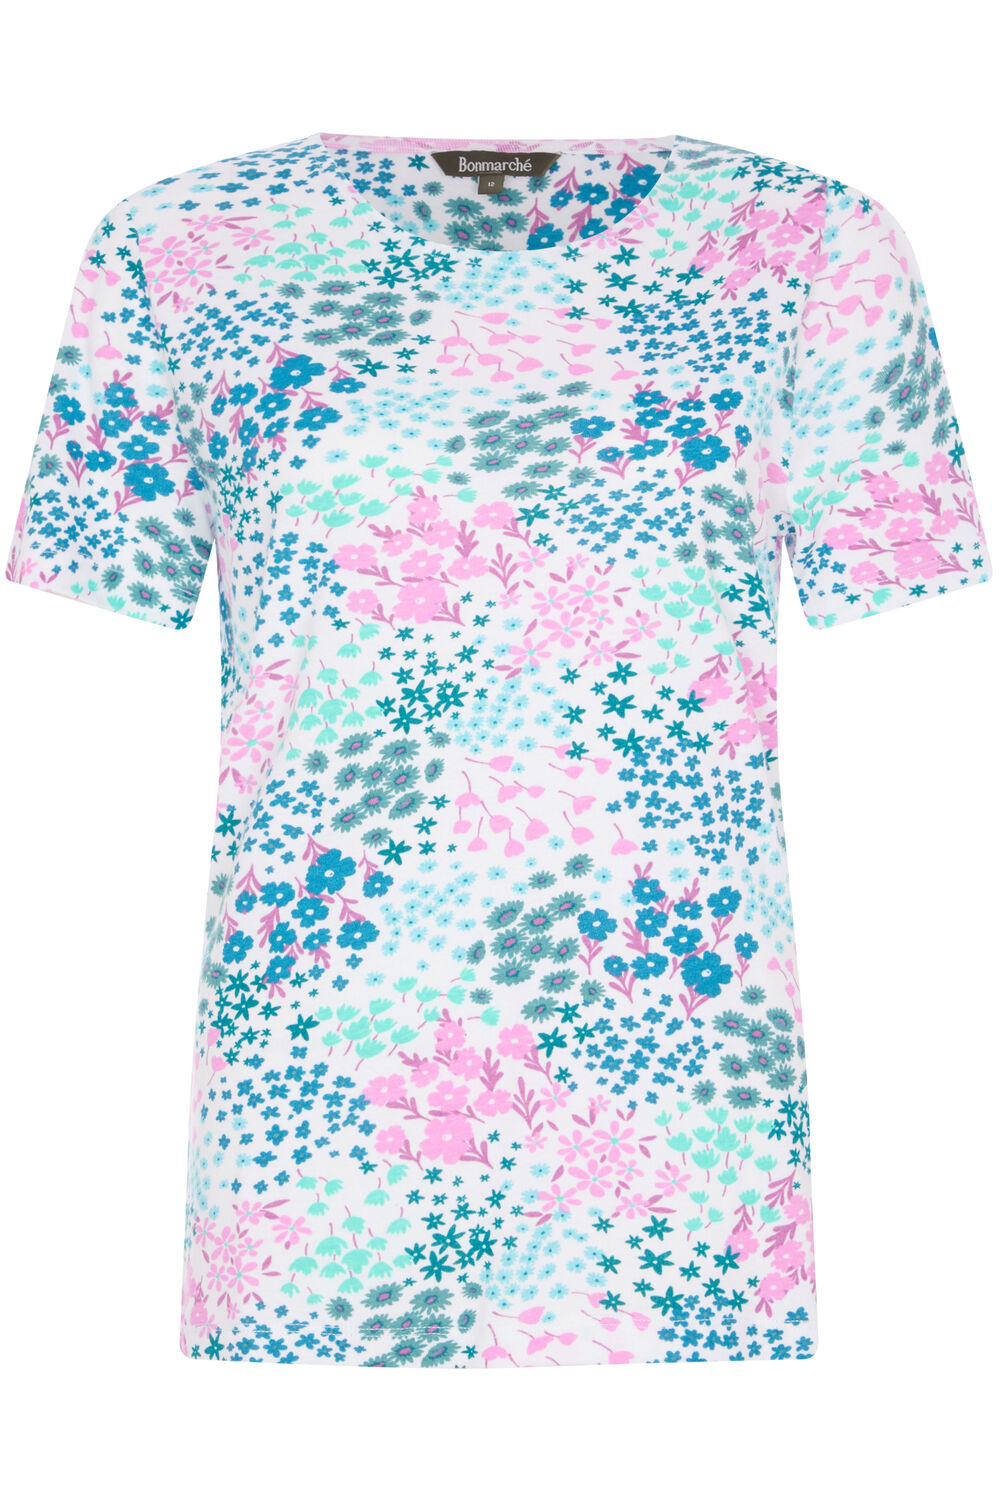 Bonmarche Ivory Short Sleeve Pressed Ditsy Print Scoop Neck T-Shirt, Size: 22